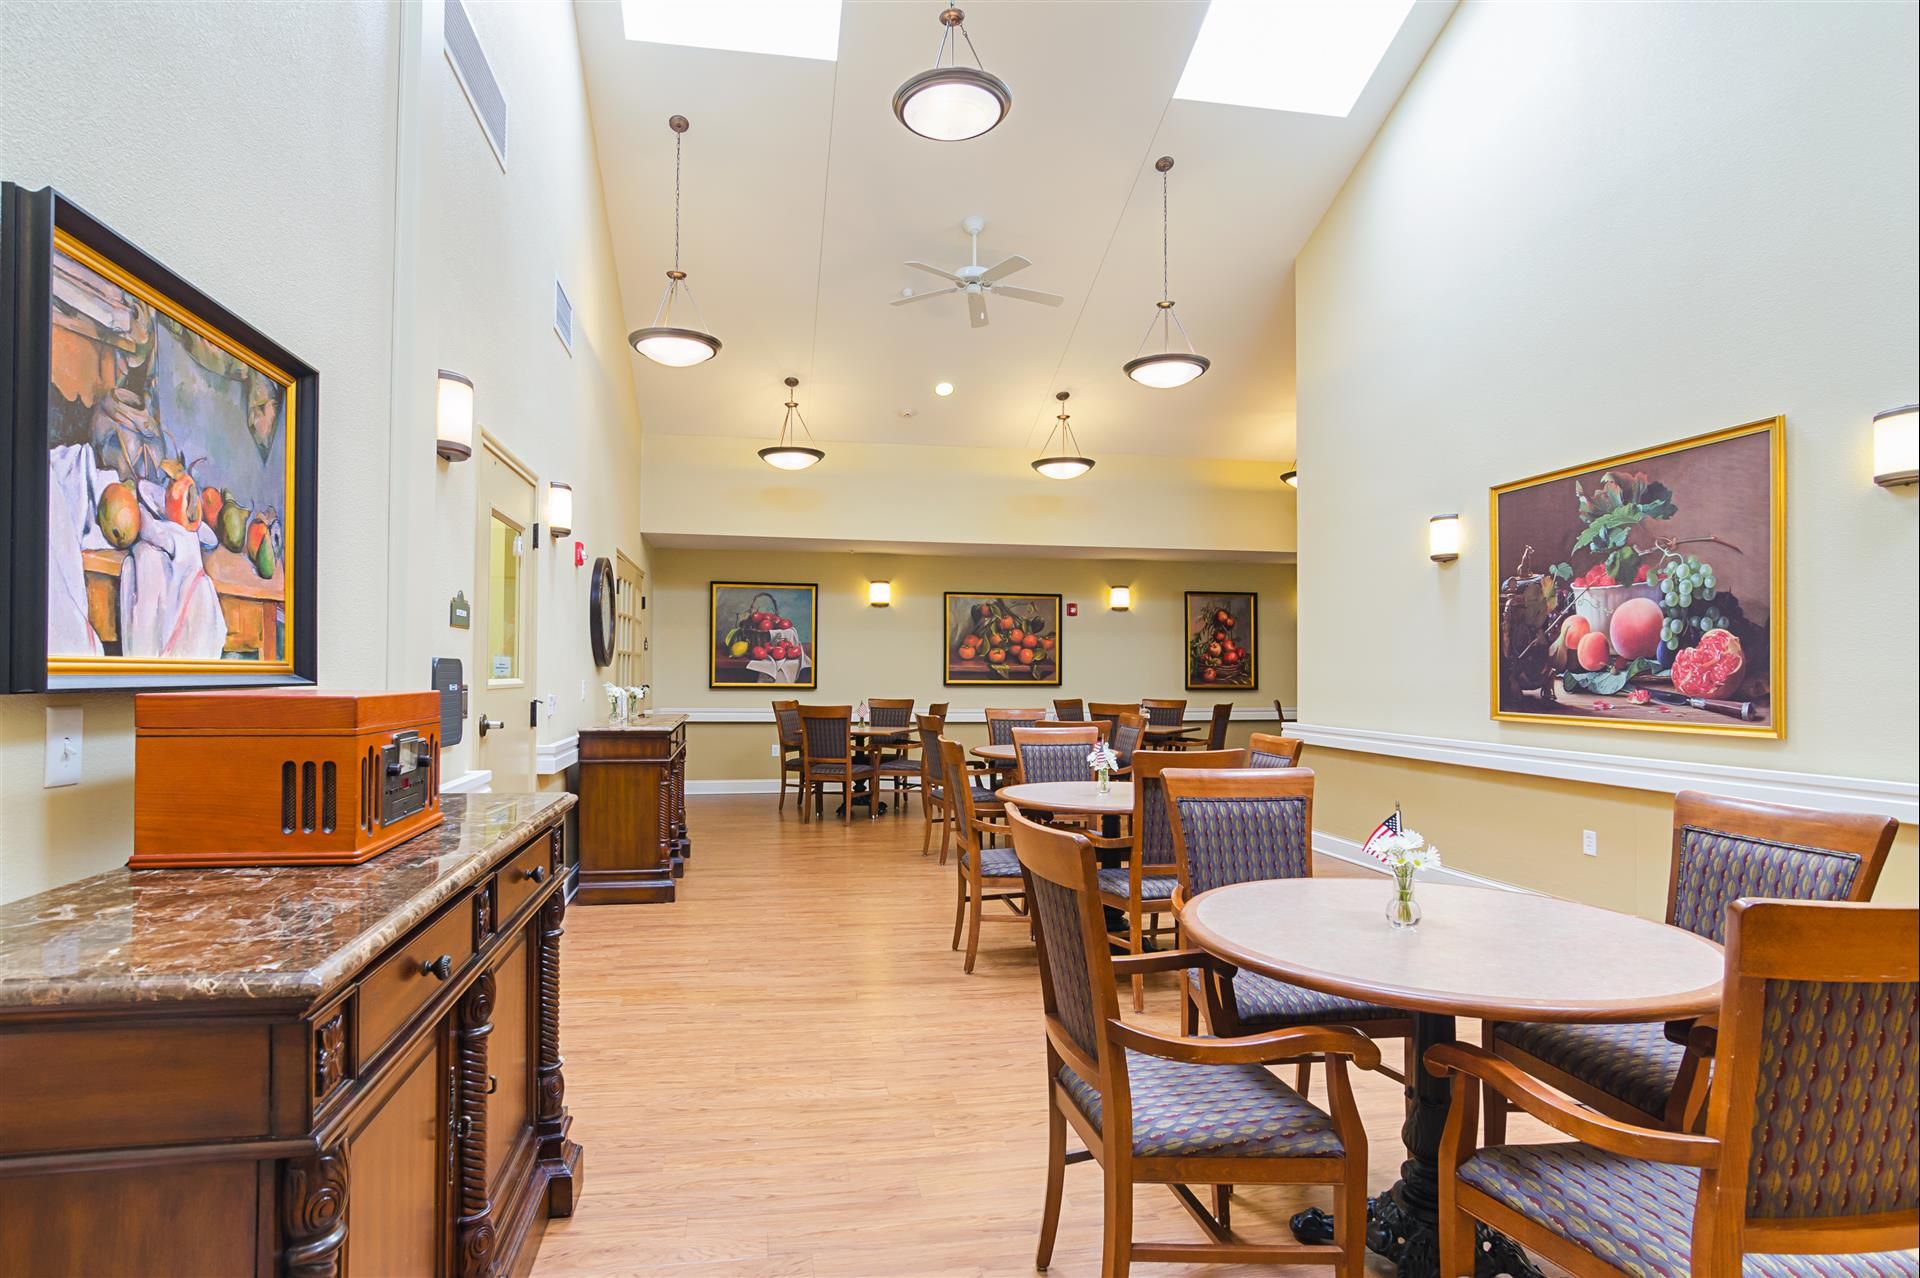 Interior view of The Gardens At Barry Road Assisted Living, featuring dining area with wooden furniture and art.